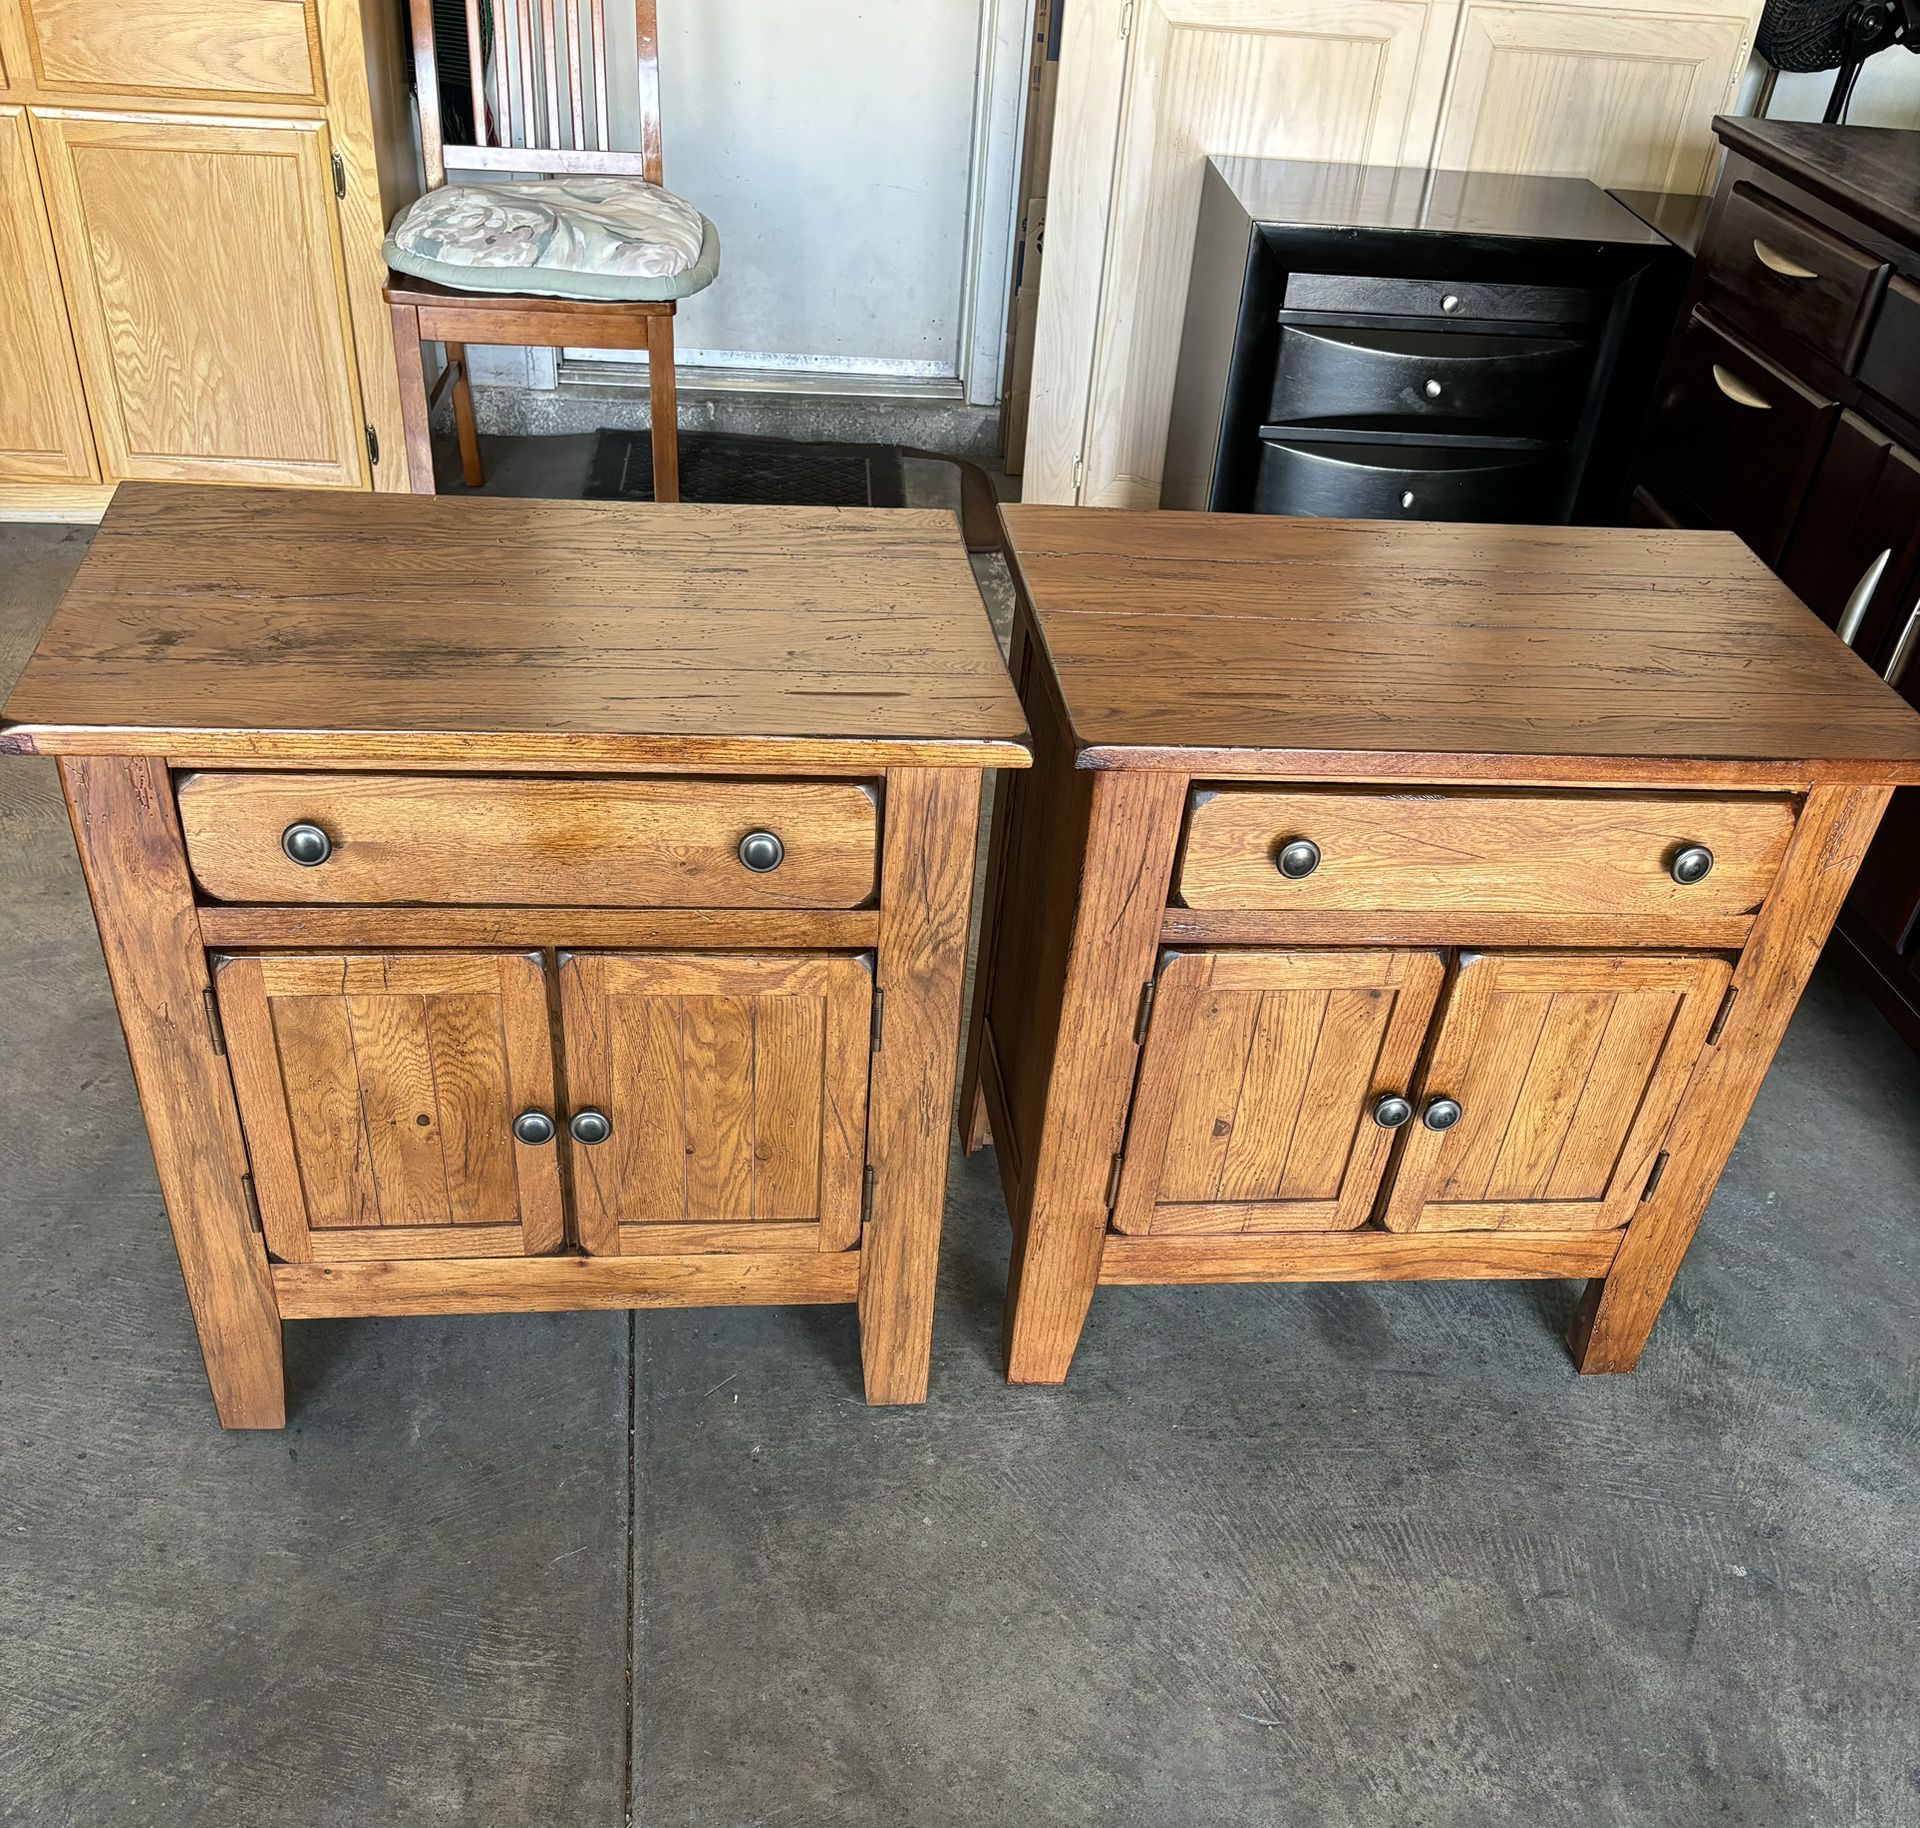 2 Matching Solid Wood Nightstands With Drawers With Brass Handles & Storage By Broyhill Attic Heirlooms,must But Both For $35Each 